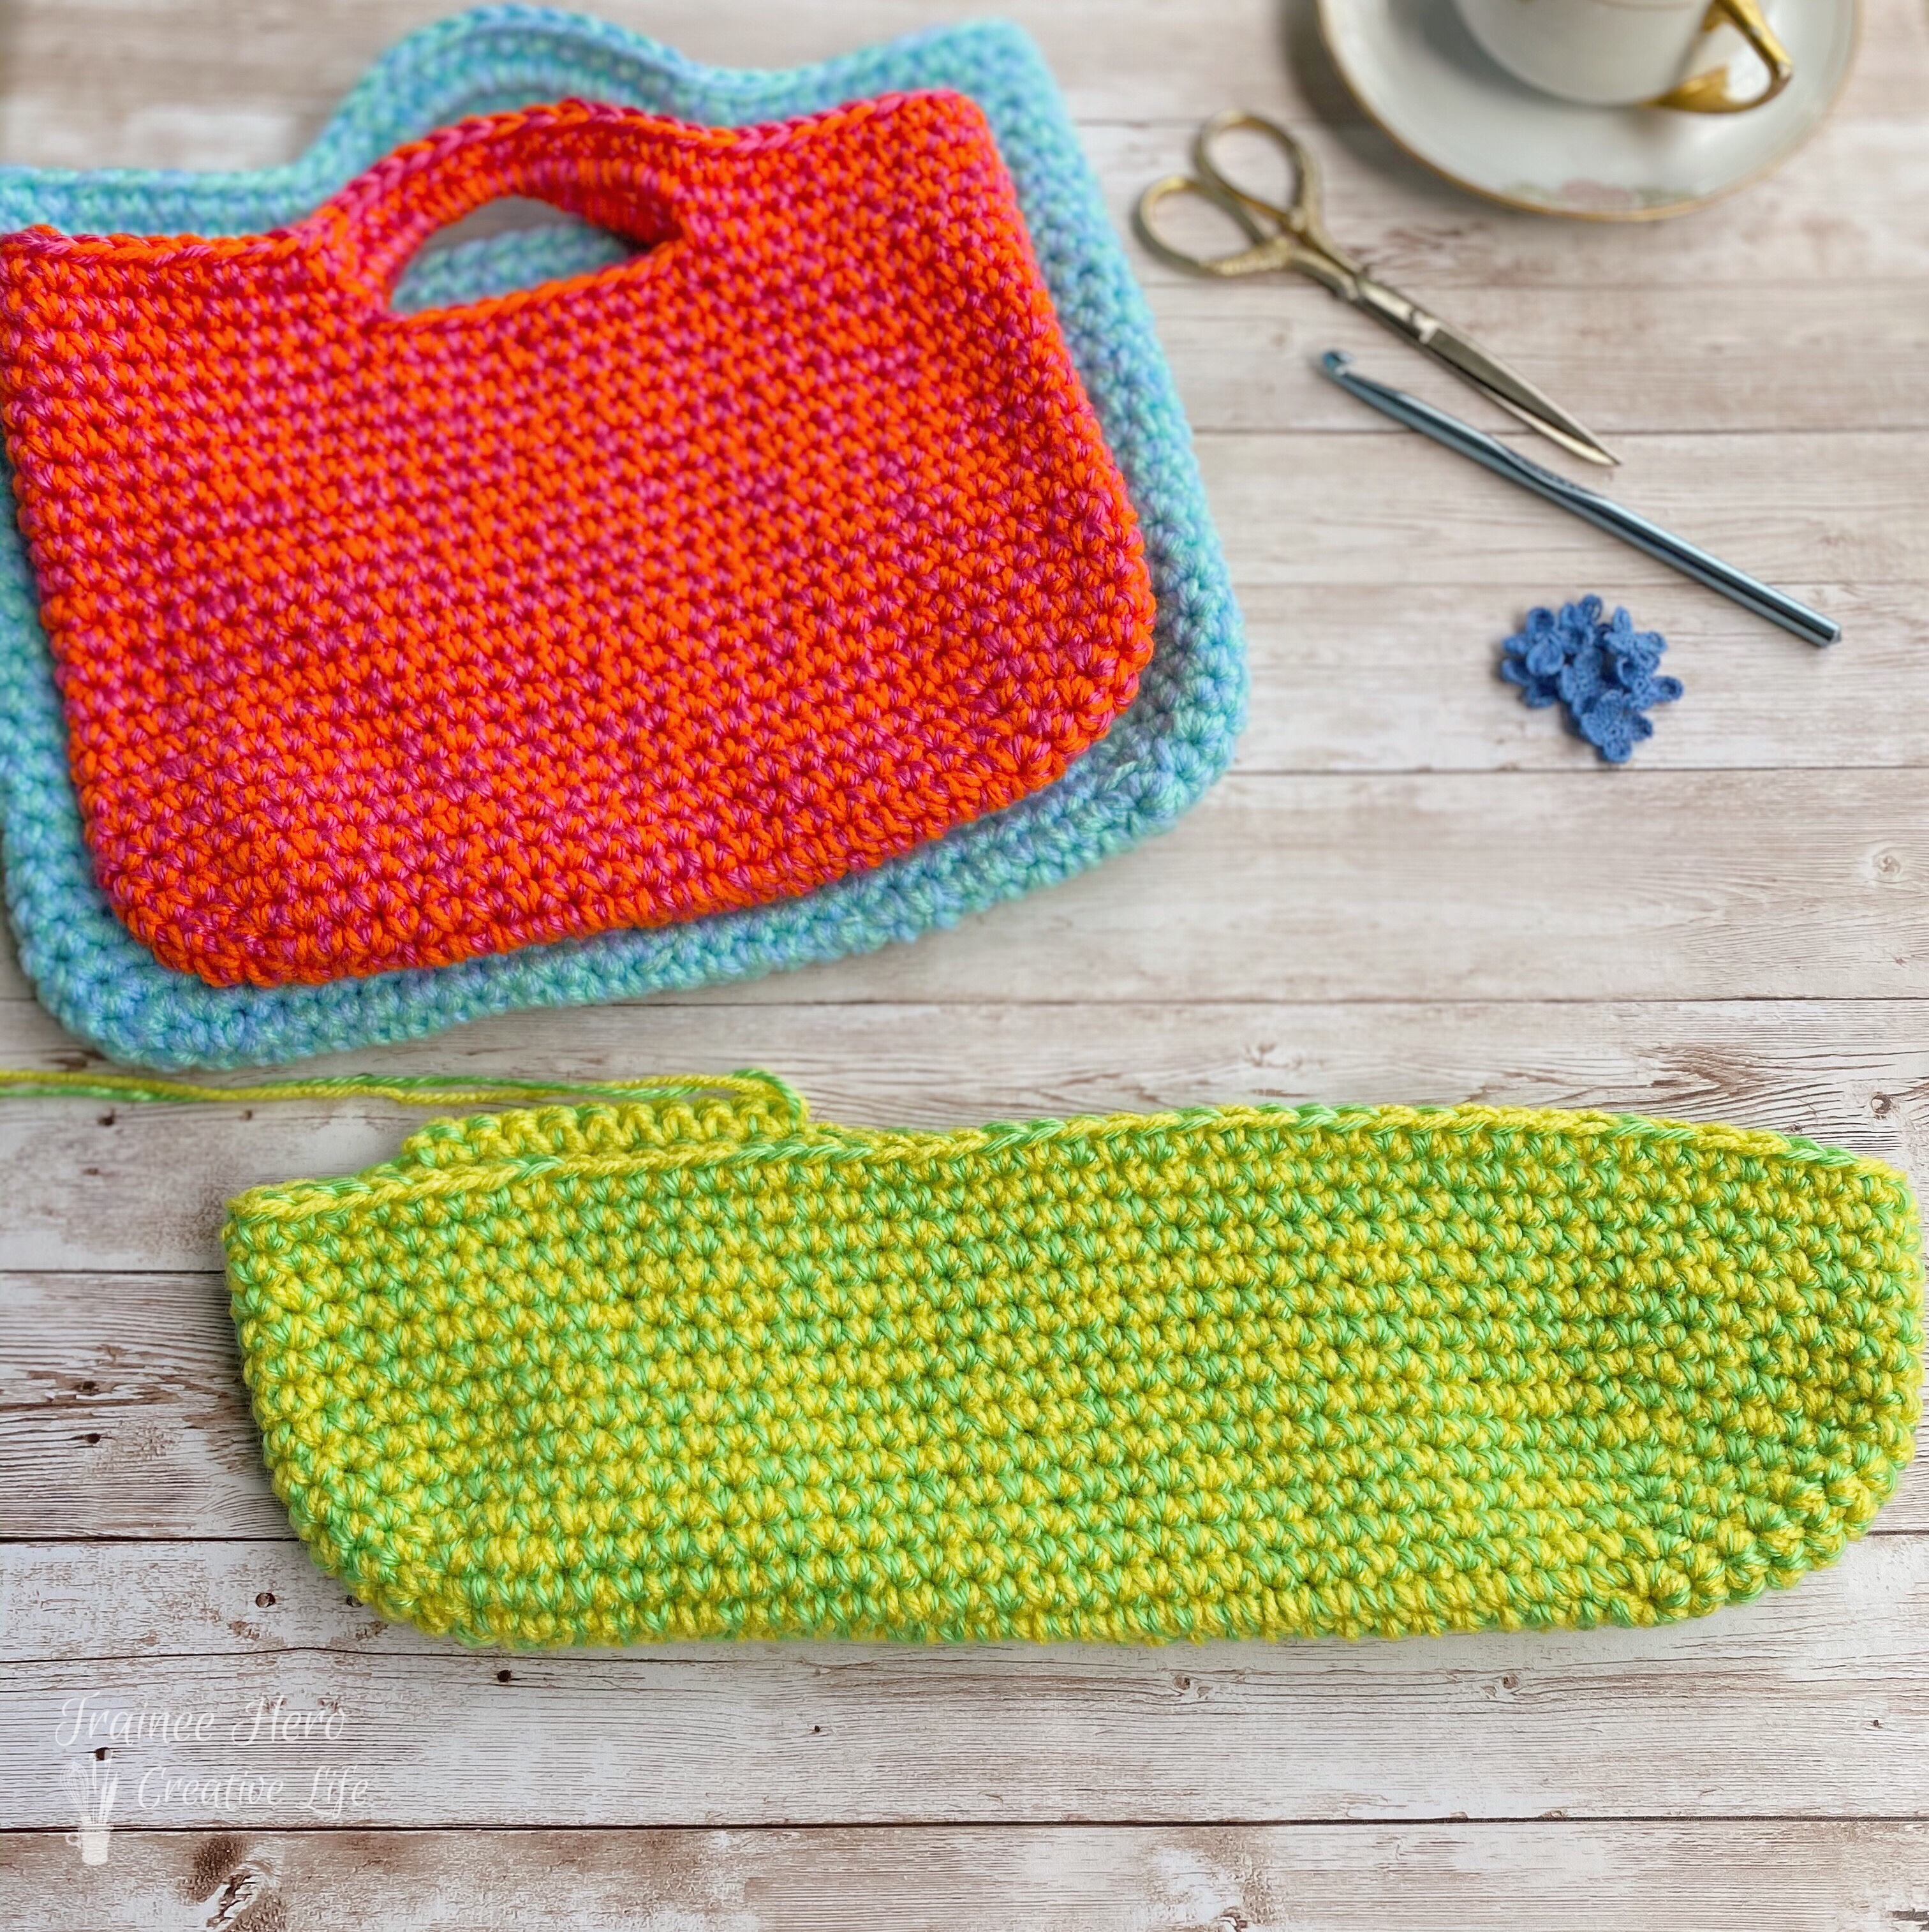 Two finished crocheted bags. One crocheted bag started below it.